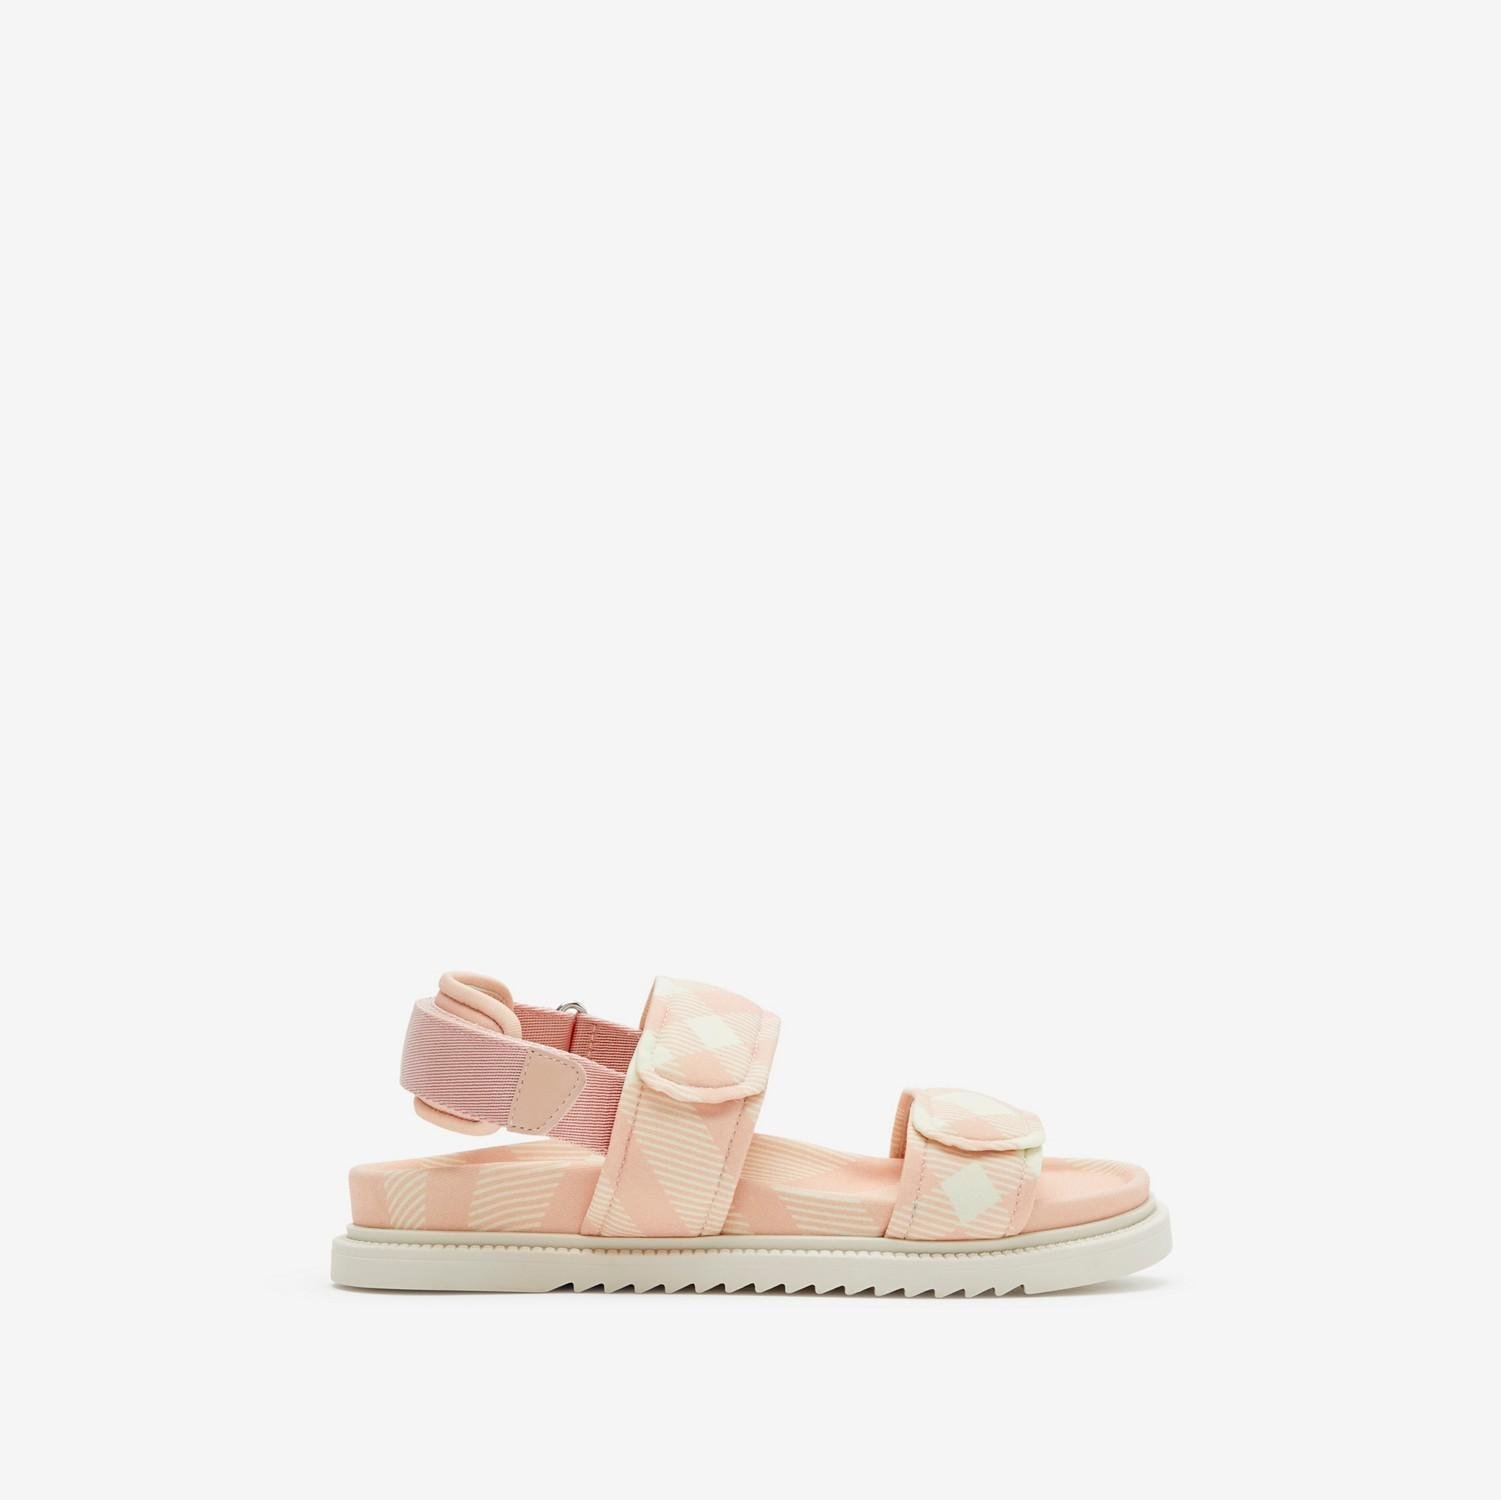 Check Sandals by BURBERRY